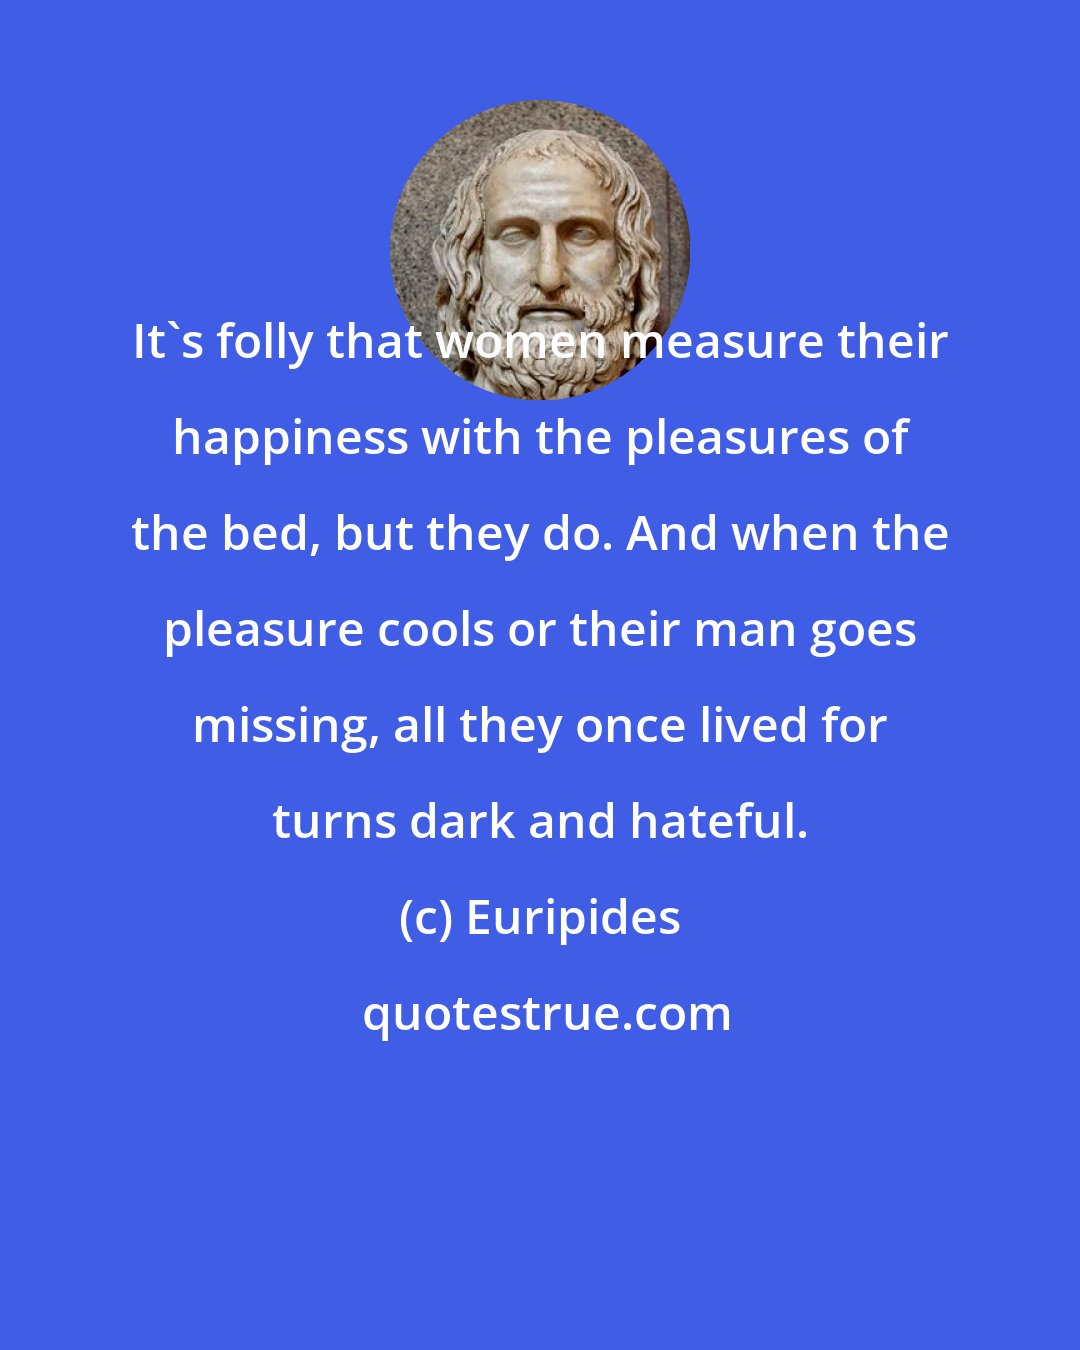 Euripides: It's folly that women measure their happiness with the pleasures of the bed, but they do. And when the pleasure cools or their man goes missing, all they once lived for turns dark and hateful.